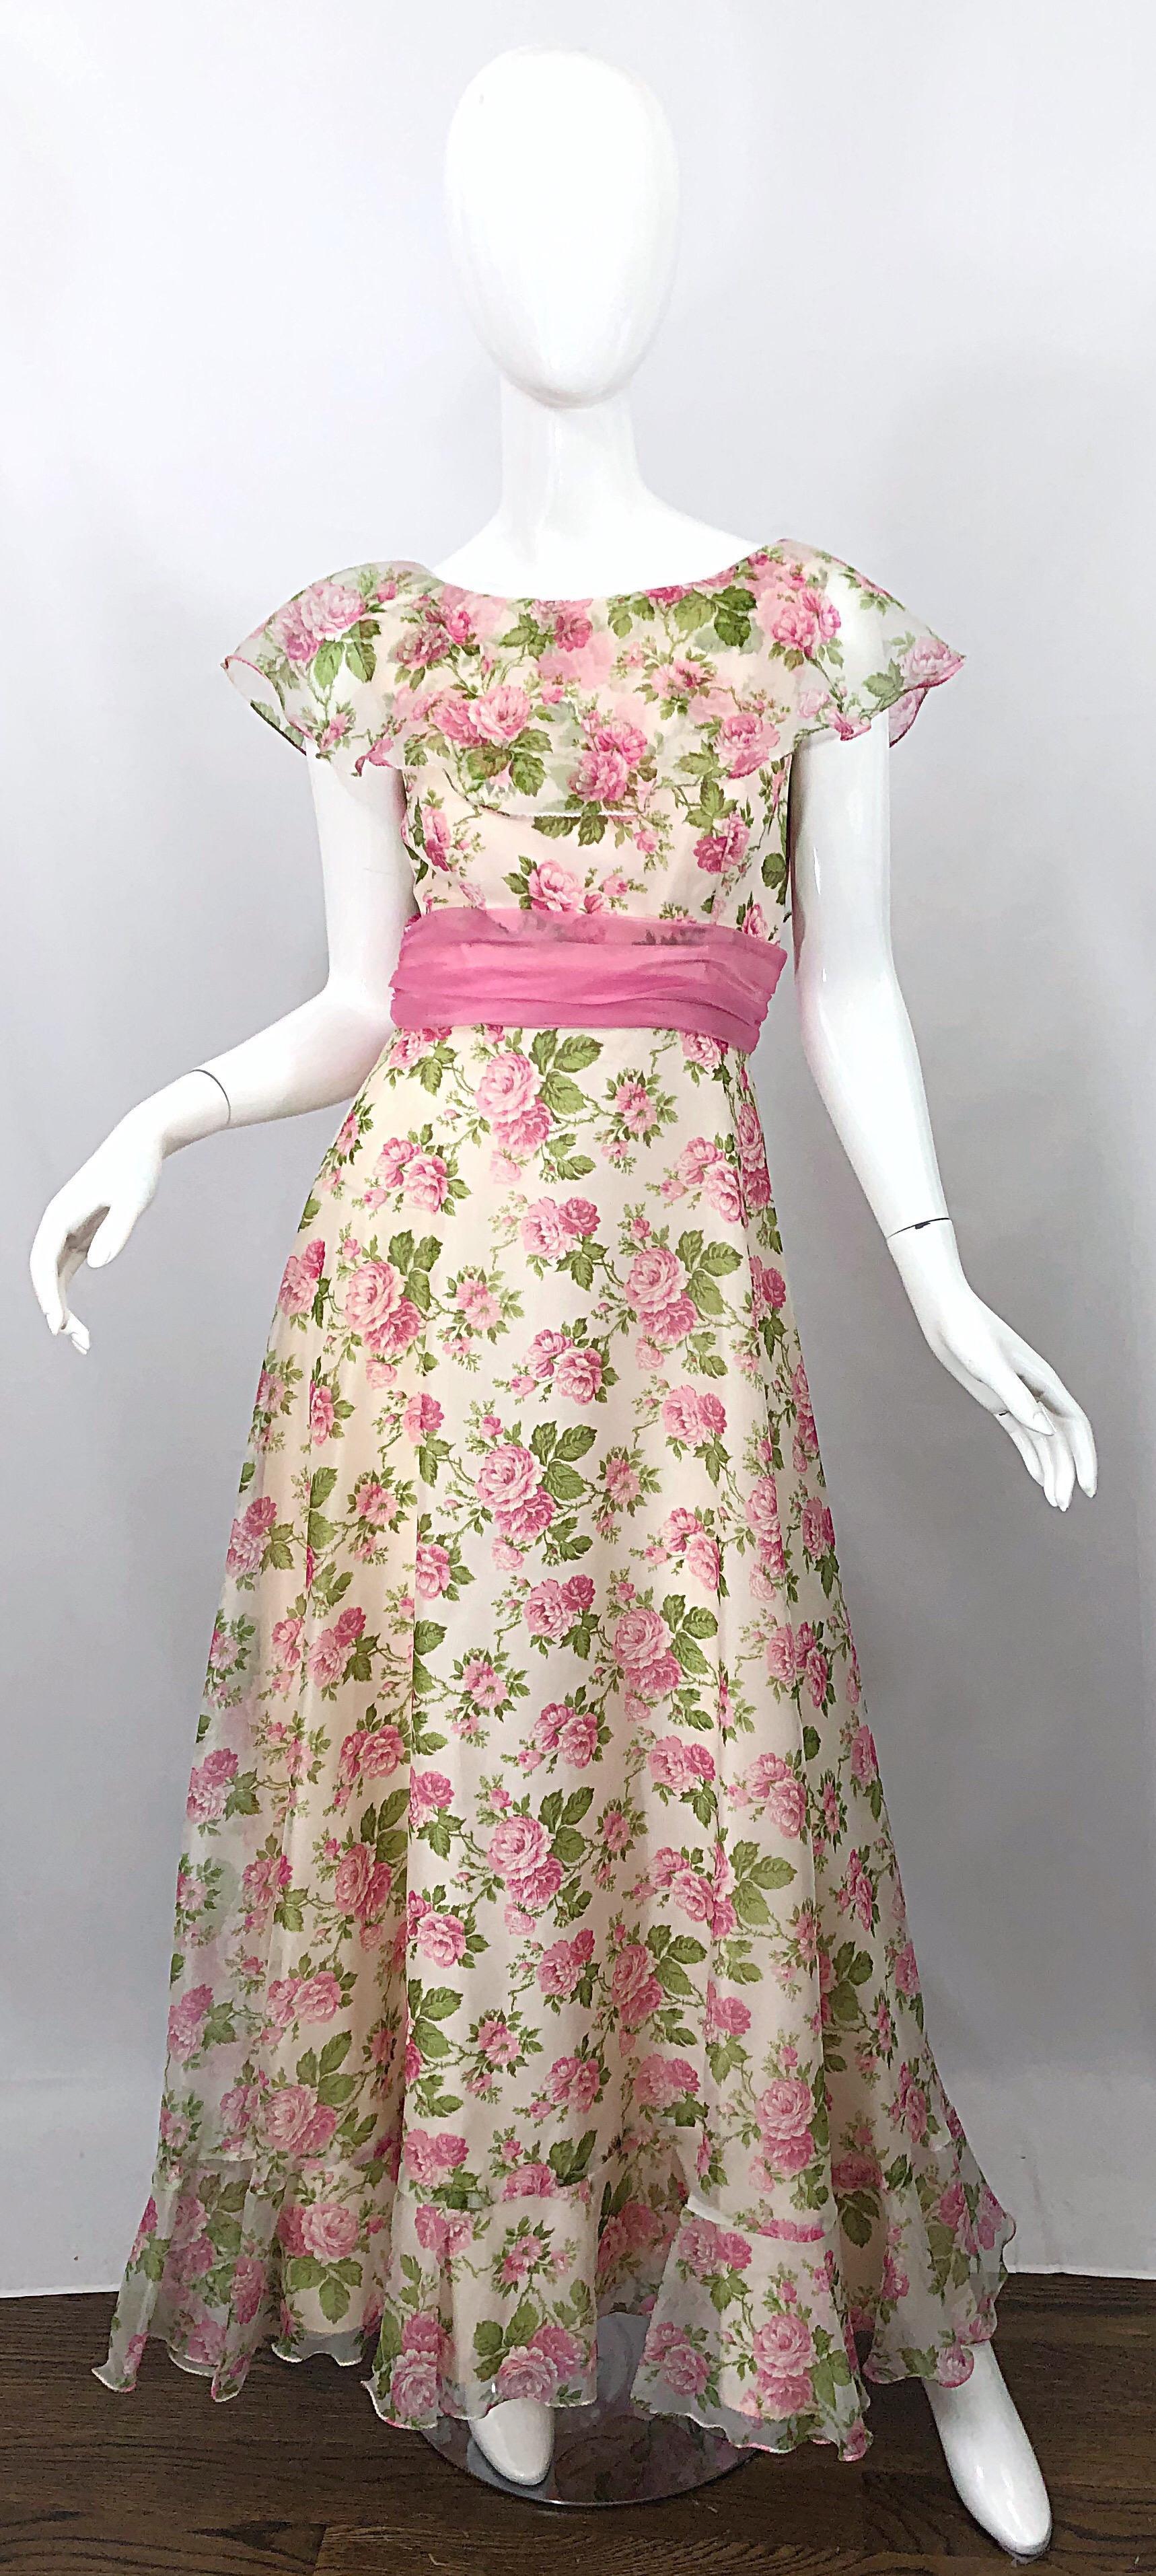 Sylvia Ann 1970s Rose Print Pink Ivory Chiffon Vintage 70s Maxi Dress Gown For Sale 6